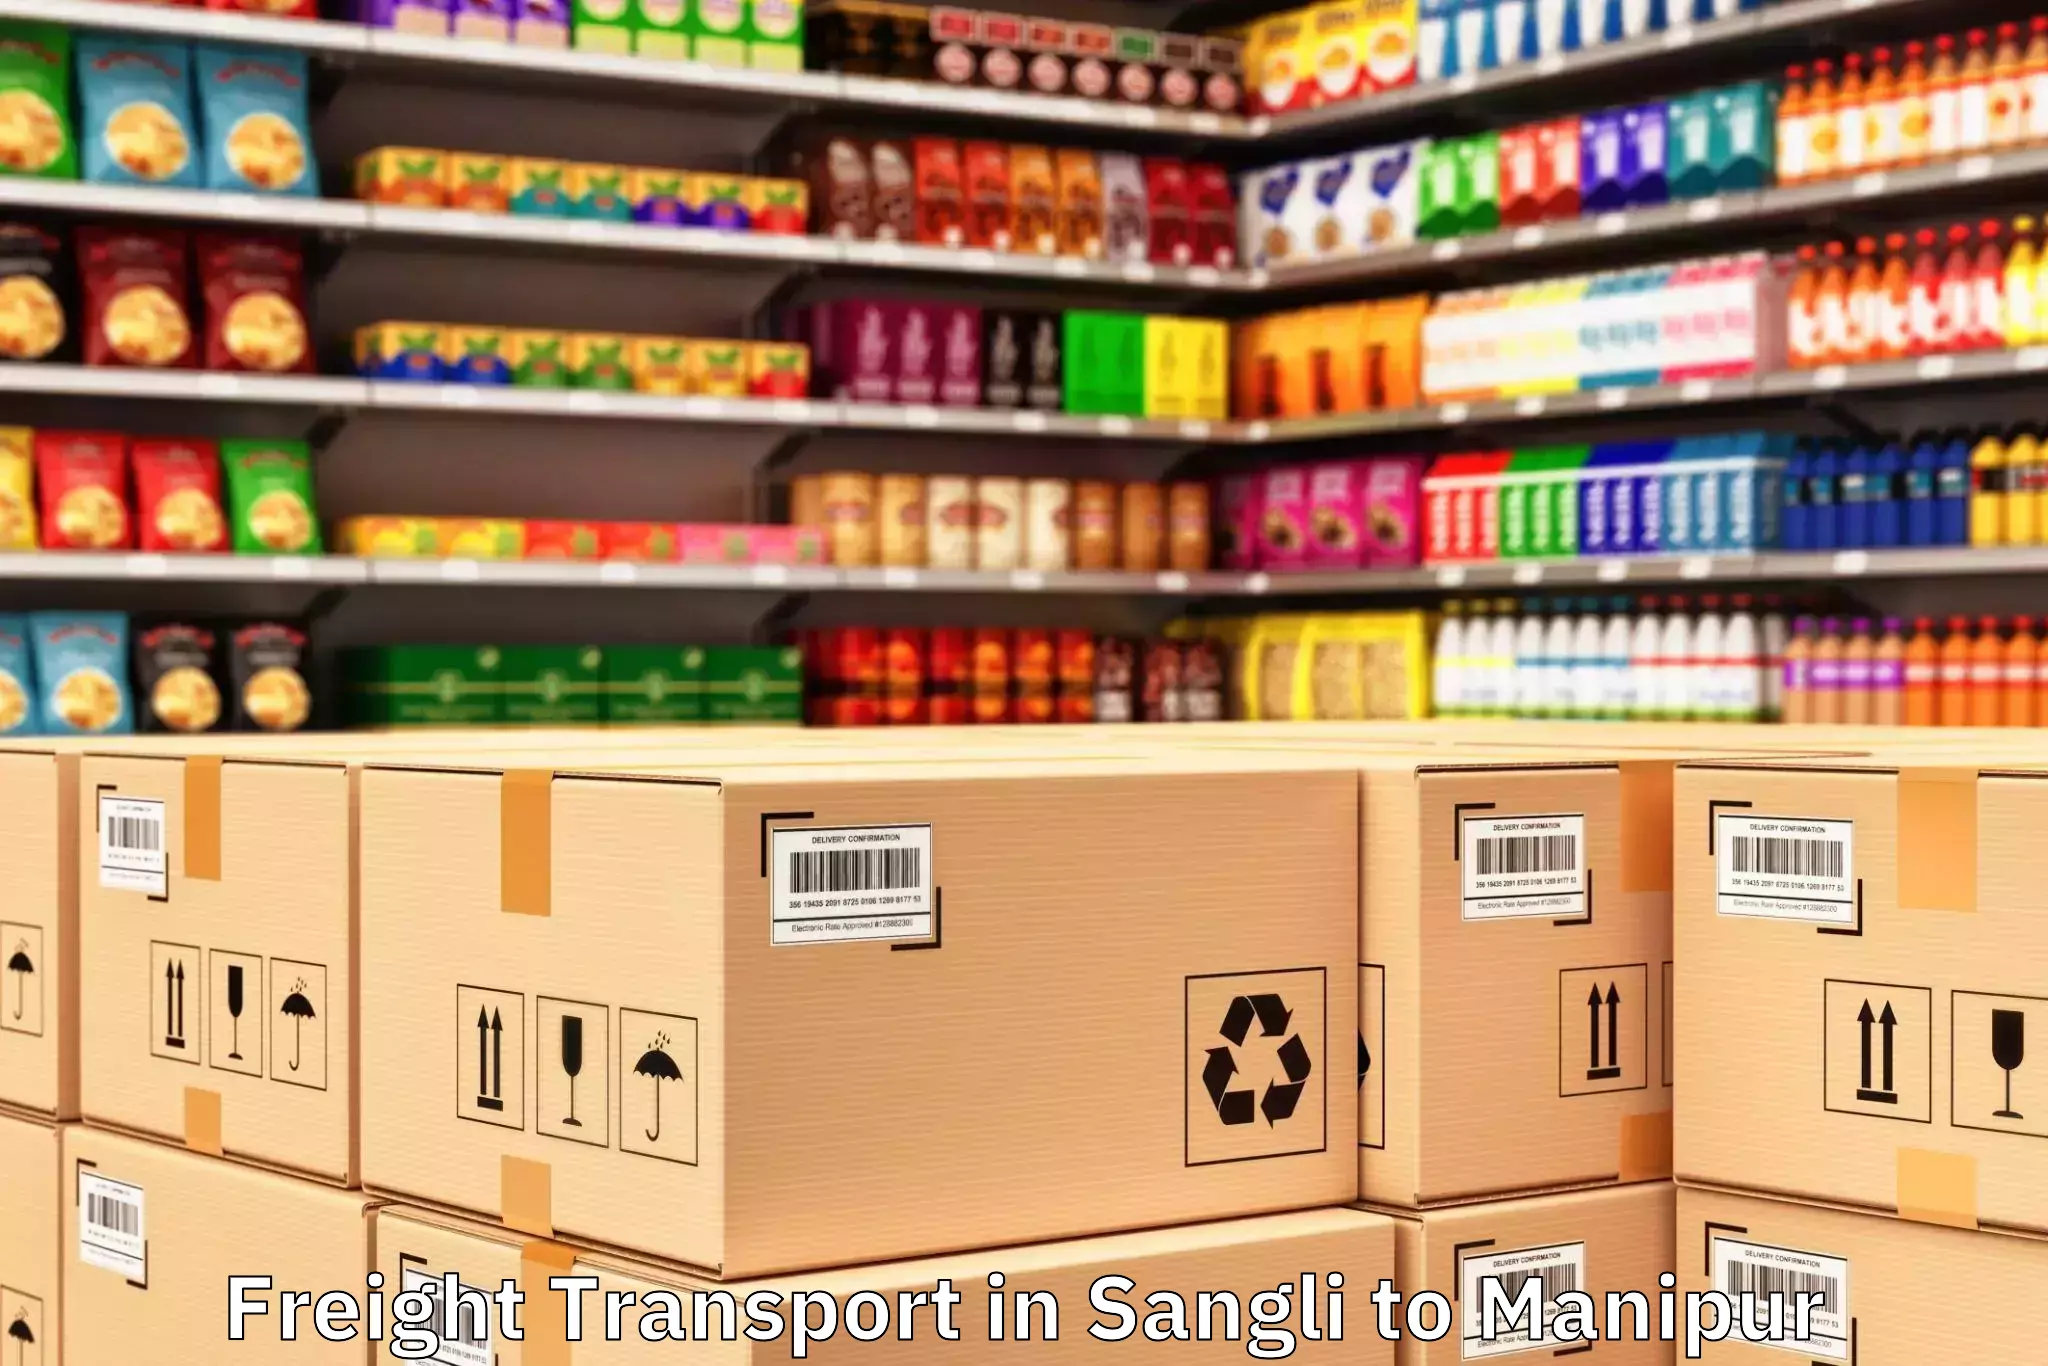 Top Sangli to Manipur Freight Transport Available